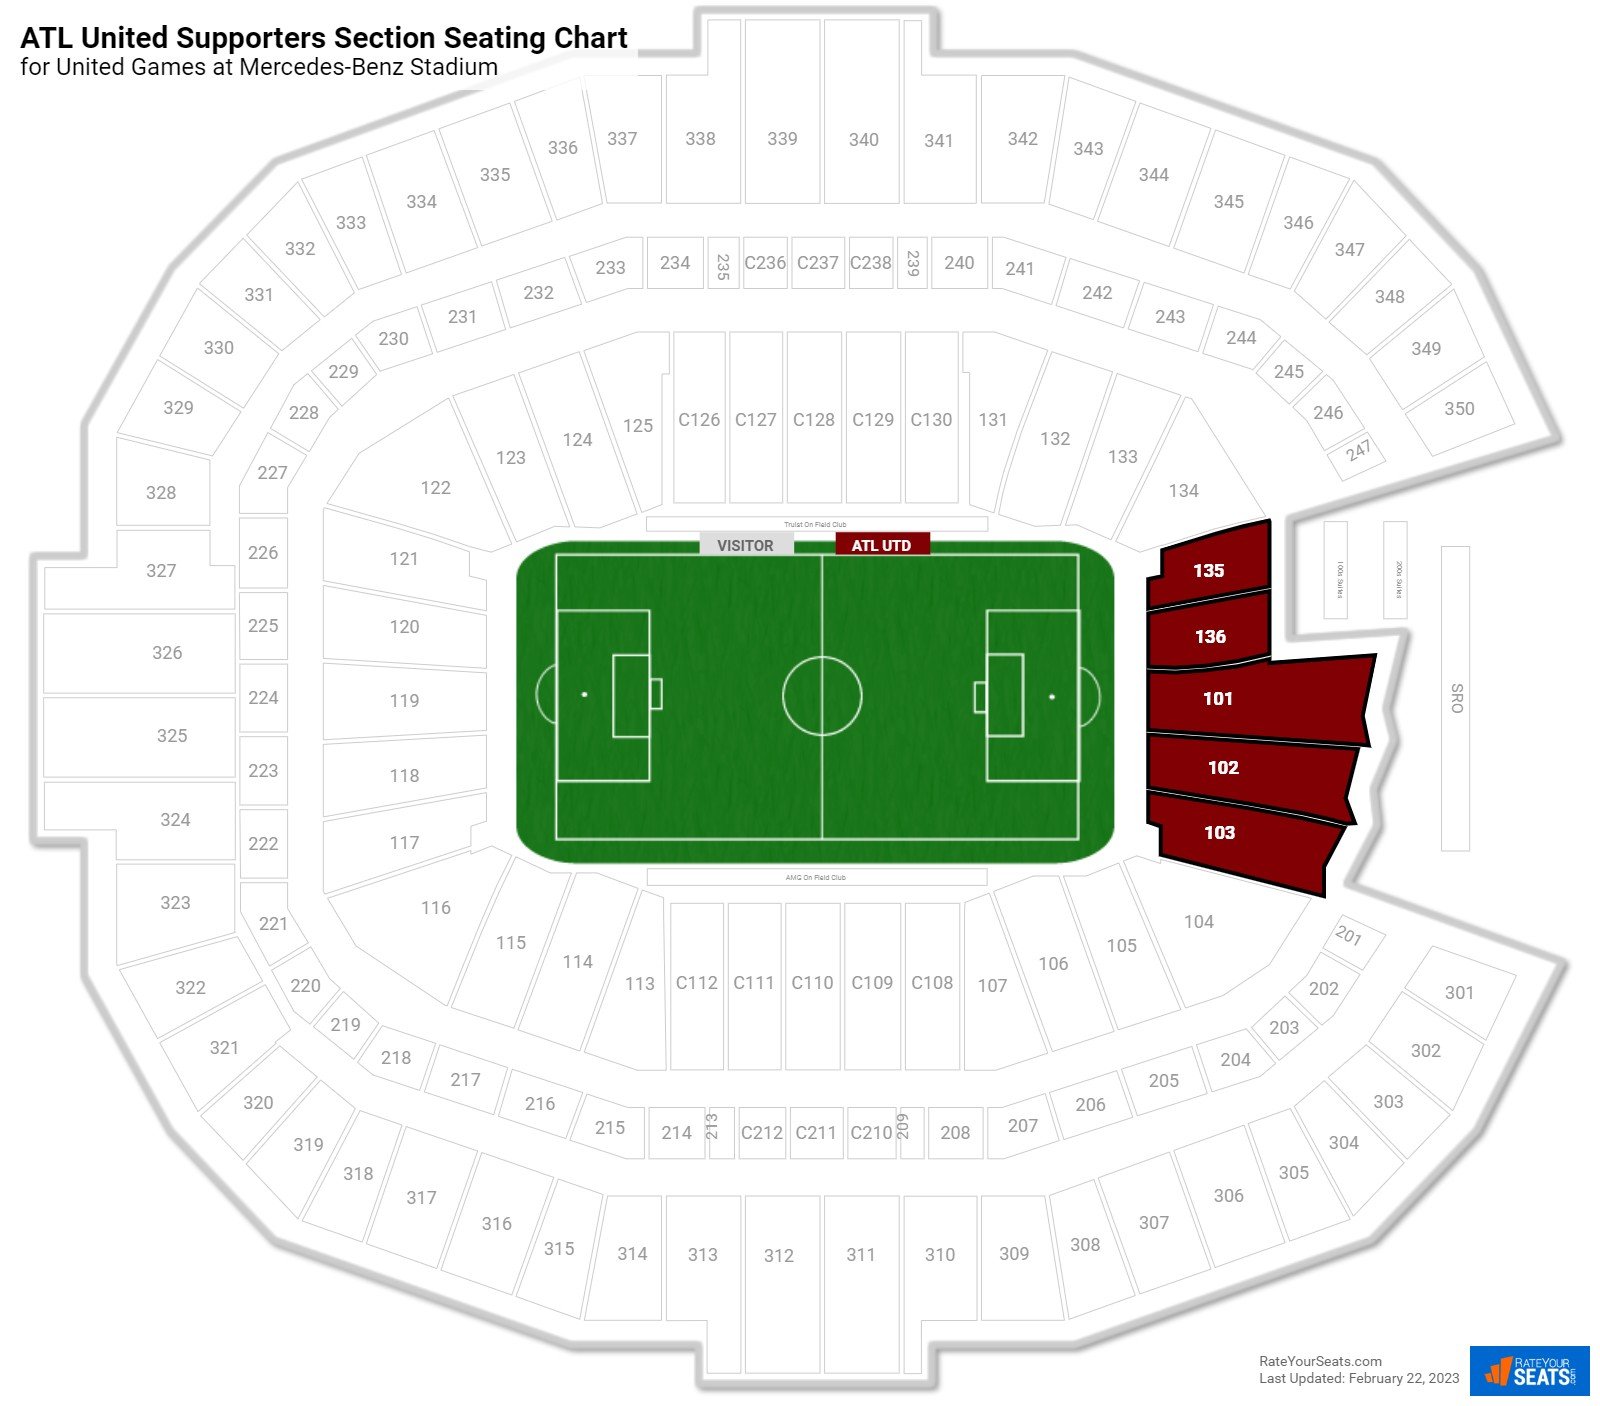 United ATL United Supporters Section Seating Chart at Mercedes-Benz Stadium